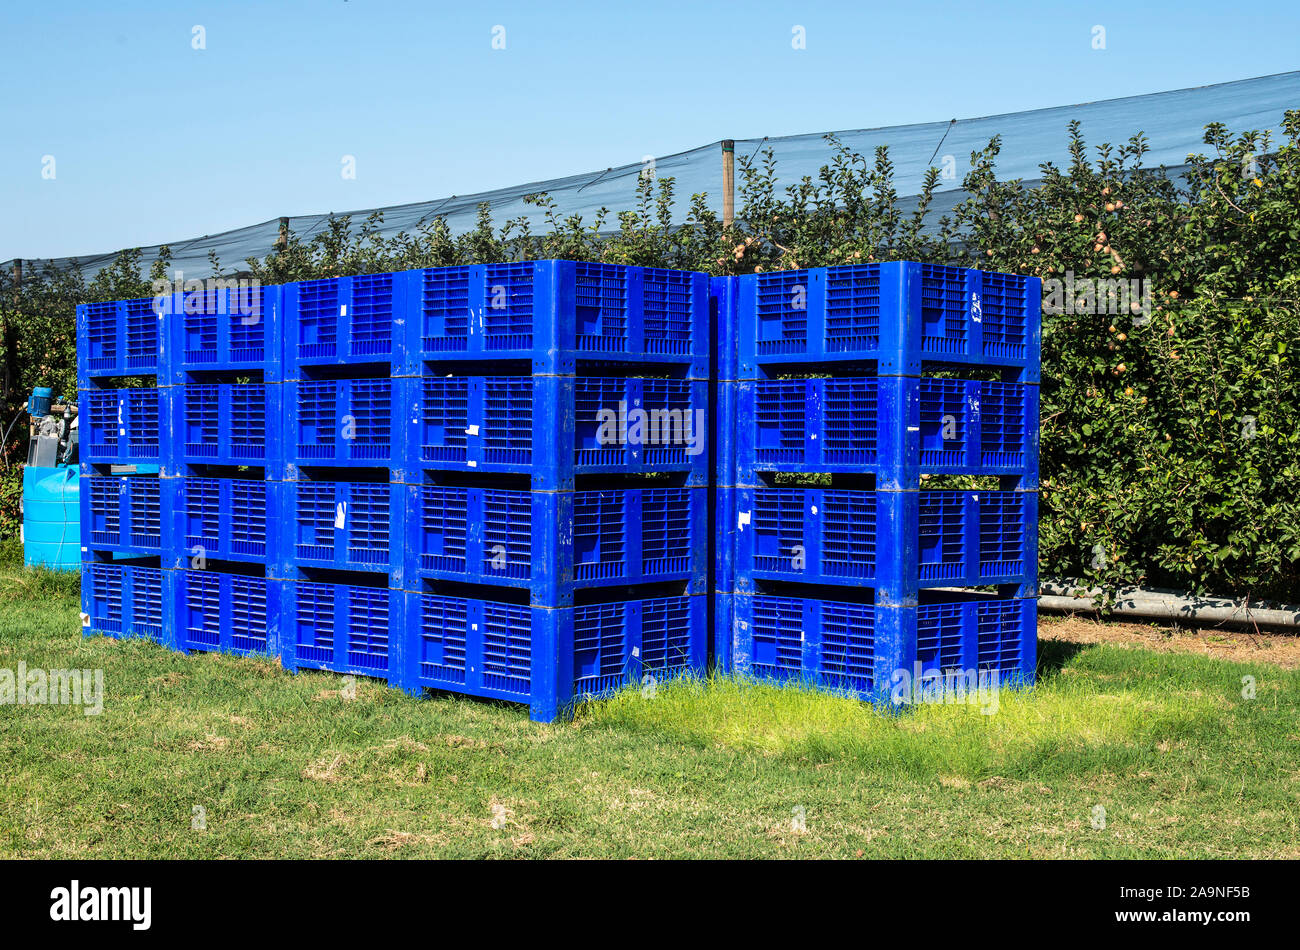 Big blue crates in apple orchard. Picking apples in industrial farm. Concept for growing and harvesting apples. Stock Photo